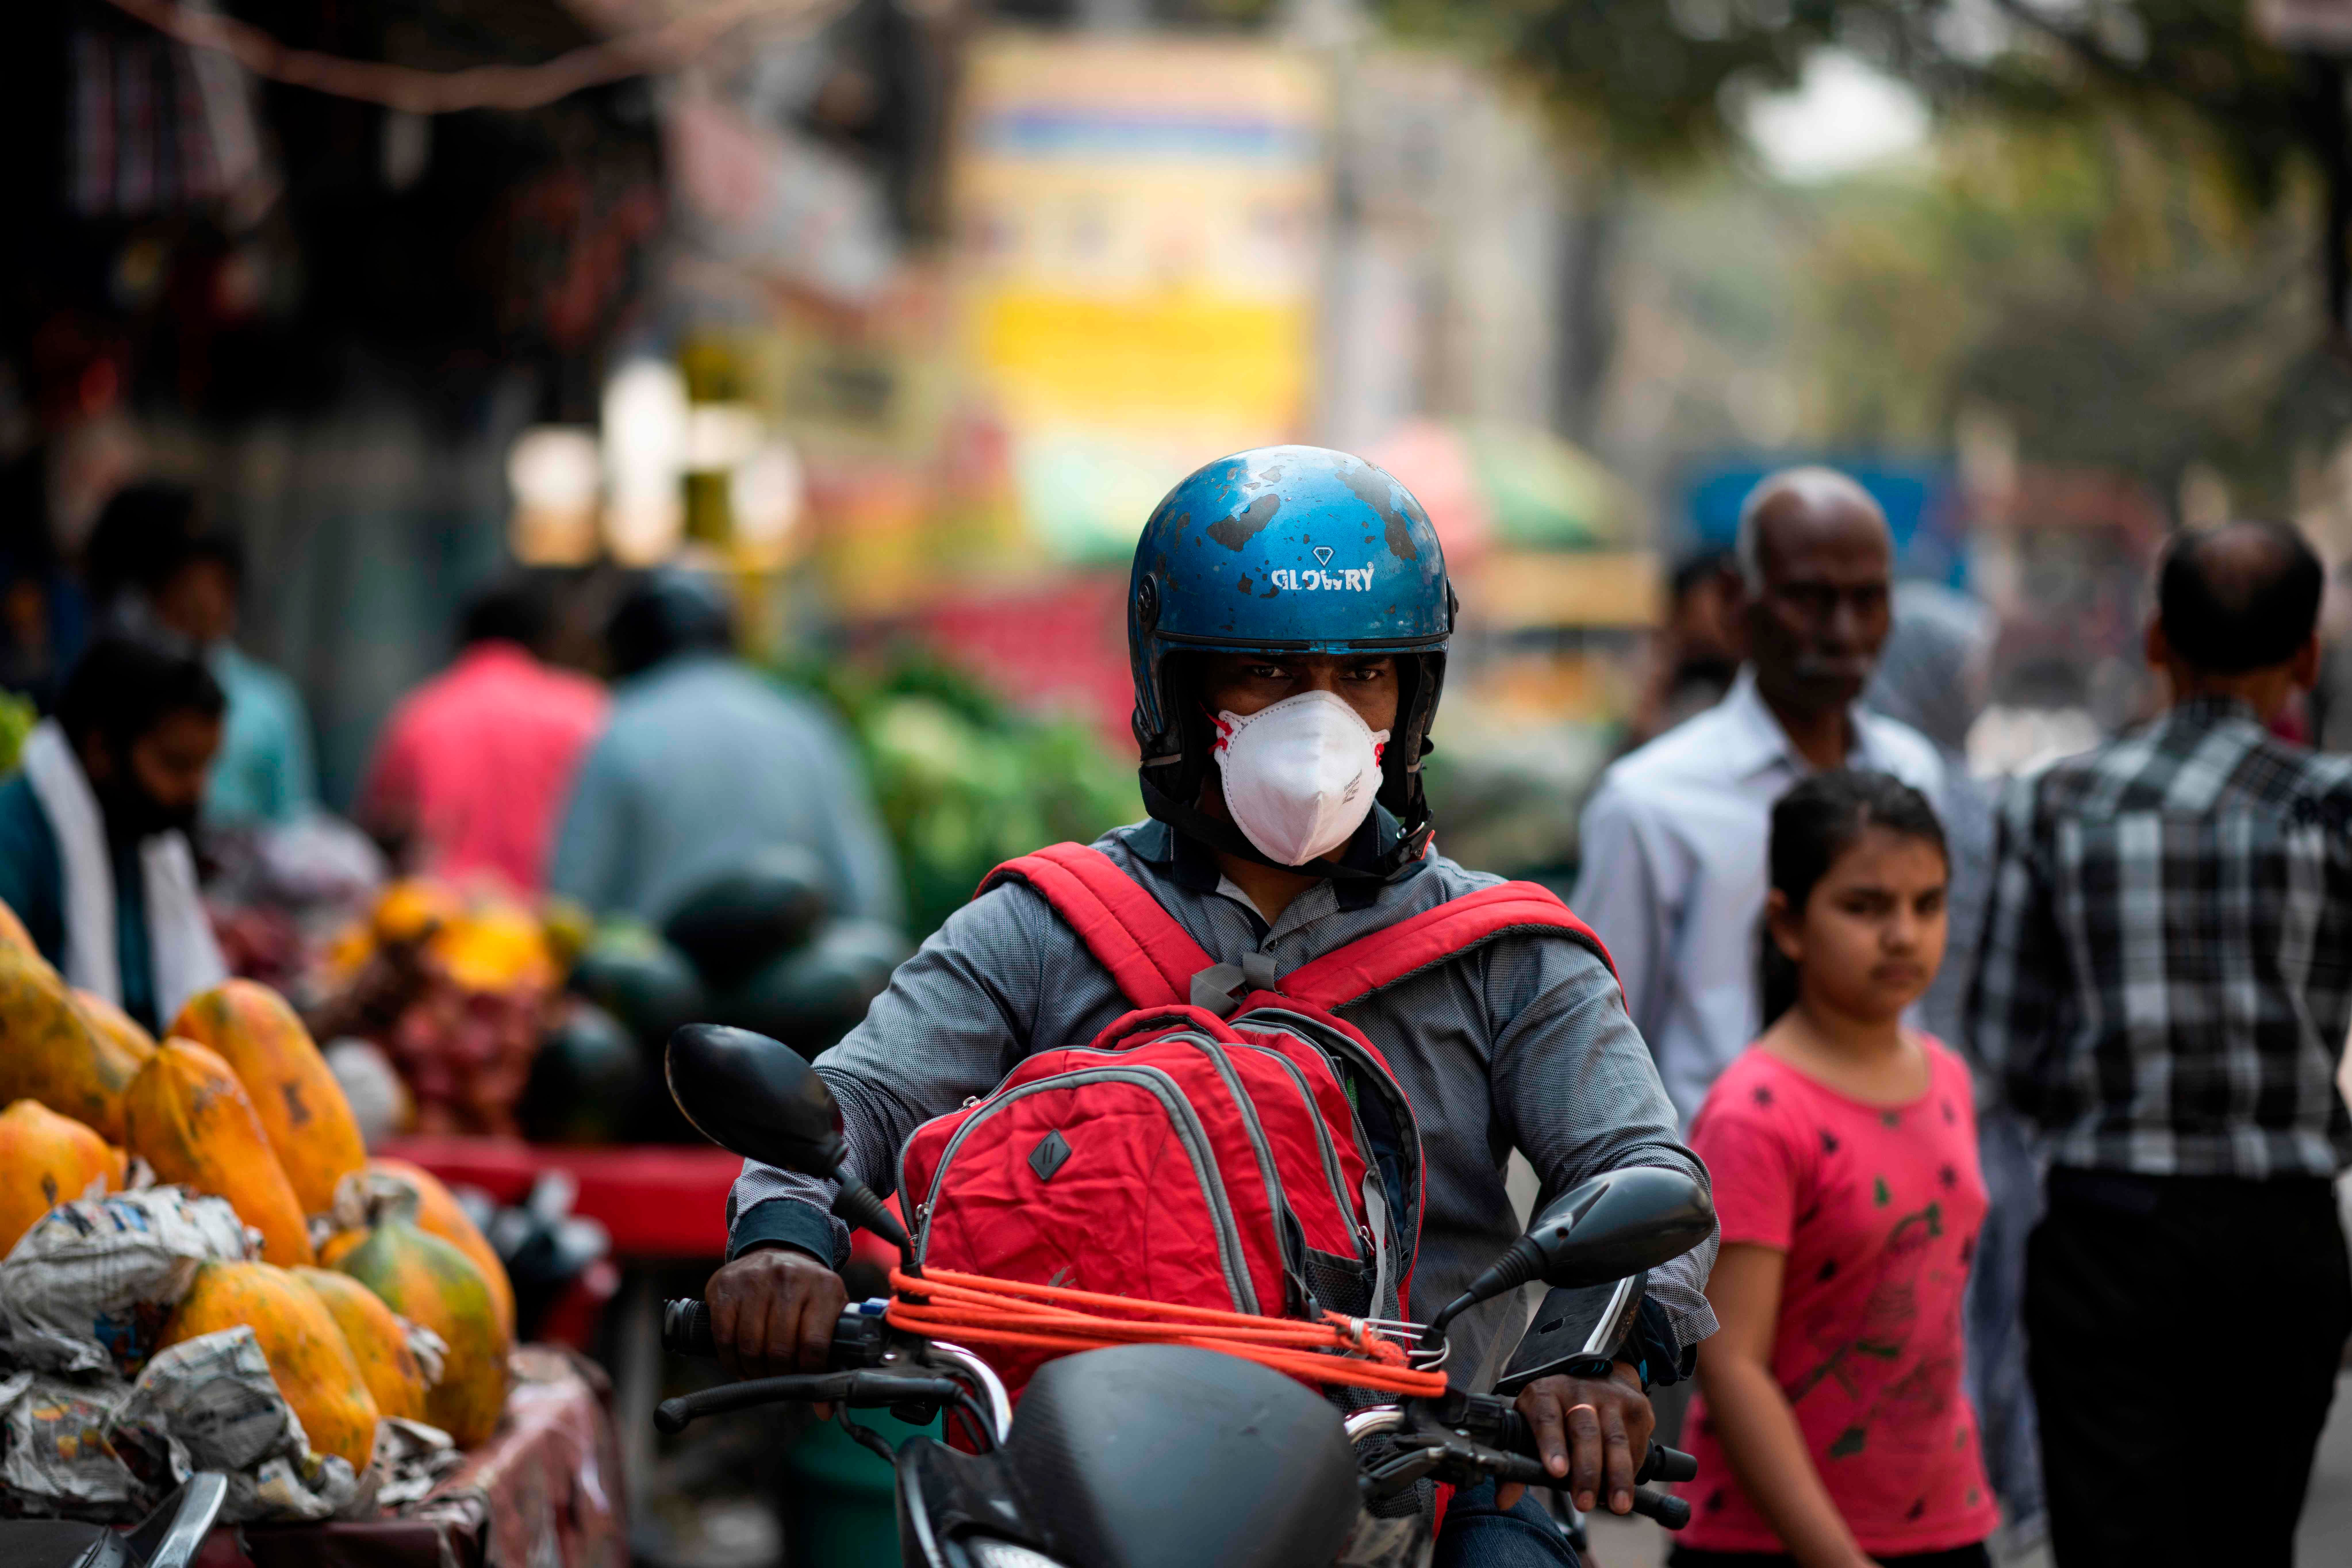 A man (C) wearing a facemask as a preventive measure against the COVID-19 coronavirus rides a motorbike along a street in New Delhi. (AFP Photo)